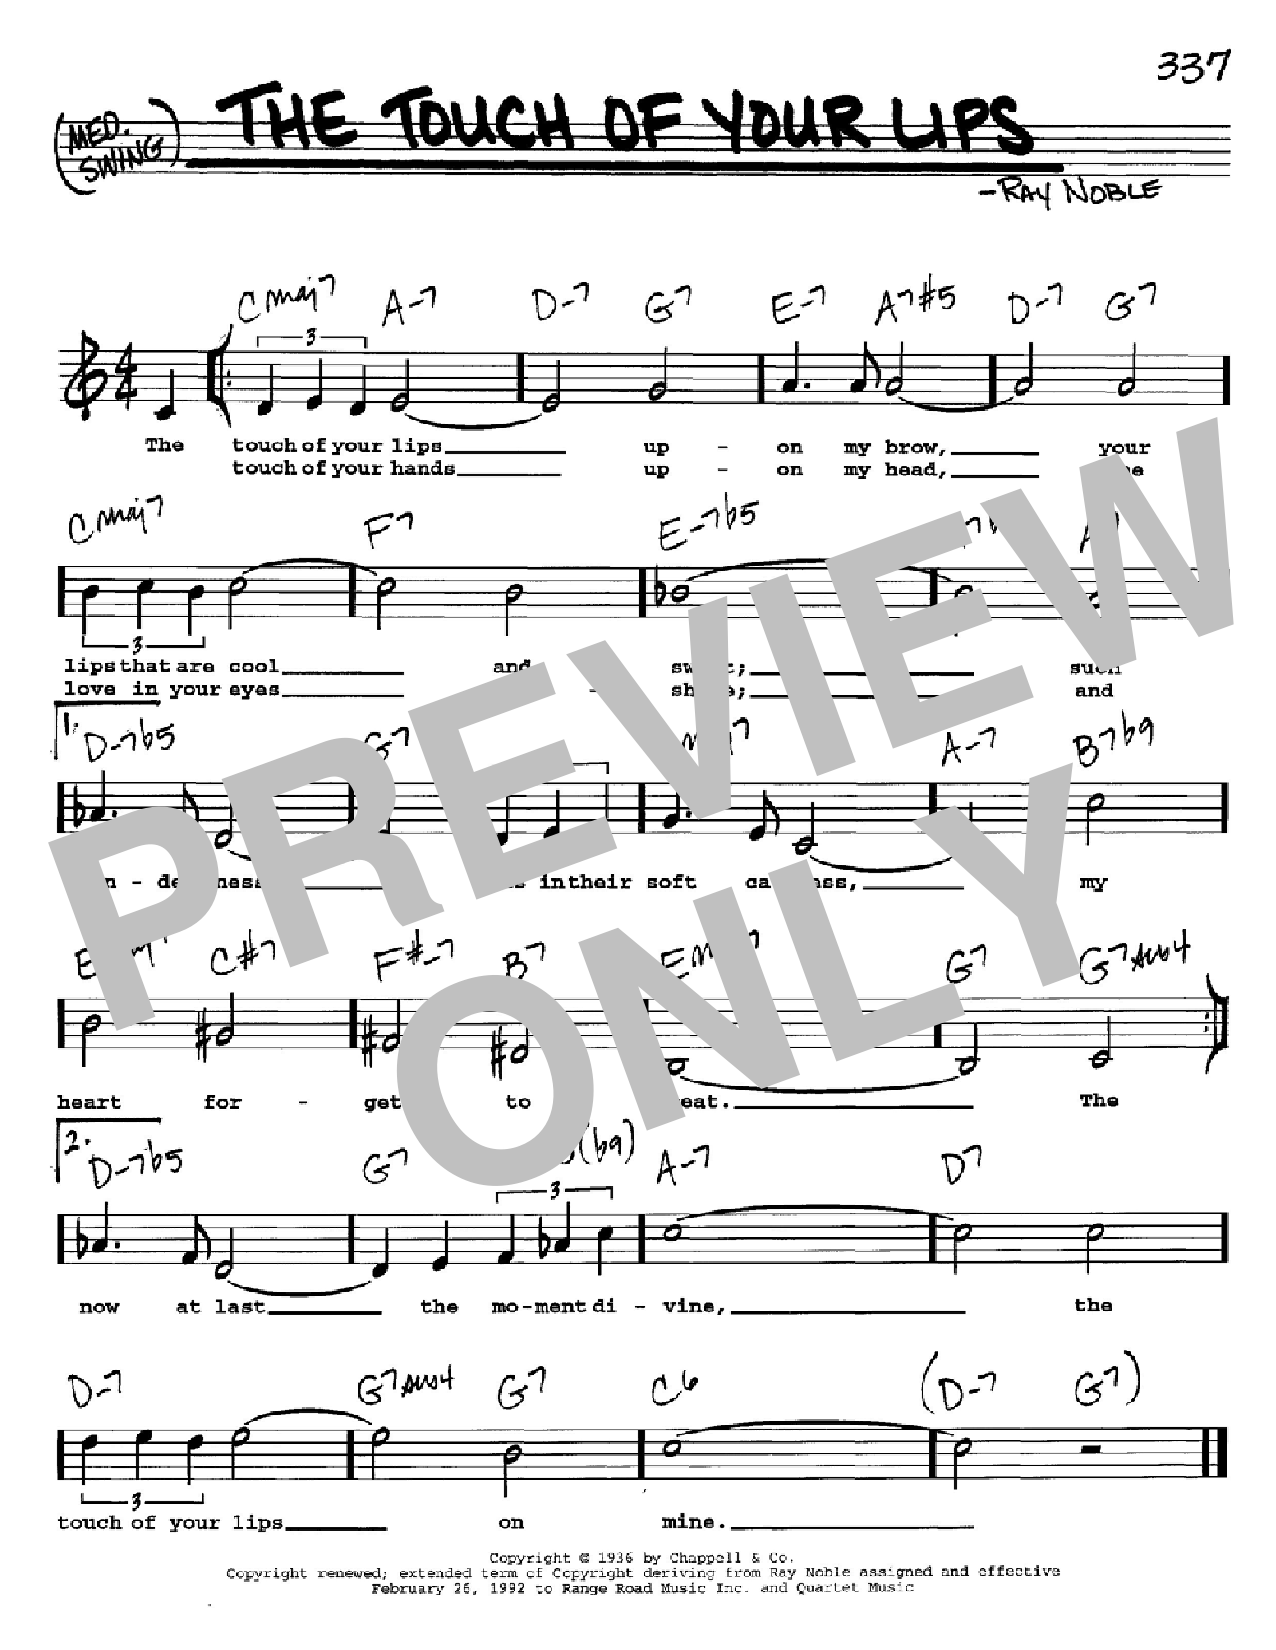 Download Ray Noble The Touch Of Your Lips Sheet Music